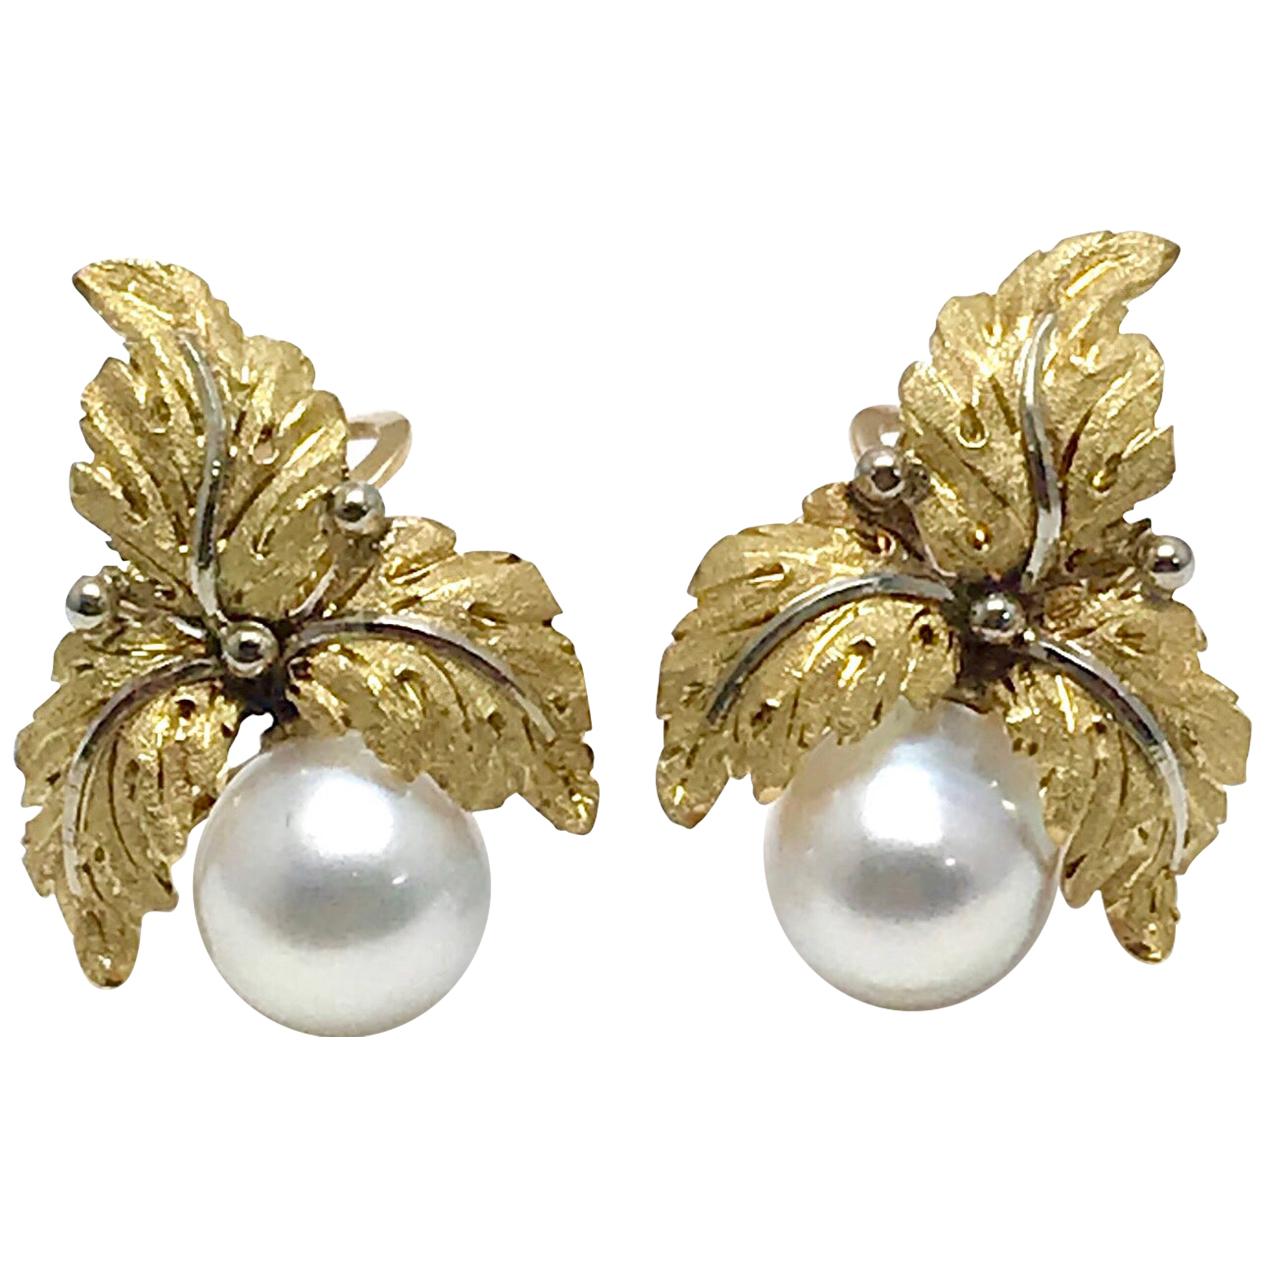 Vintage Buccellati Cultured Pearl and 18K Yellow & White Gold Leaf Clip Earrings